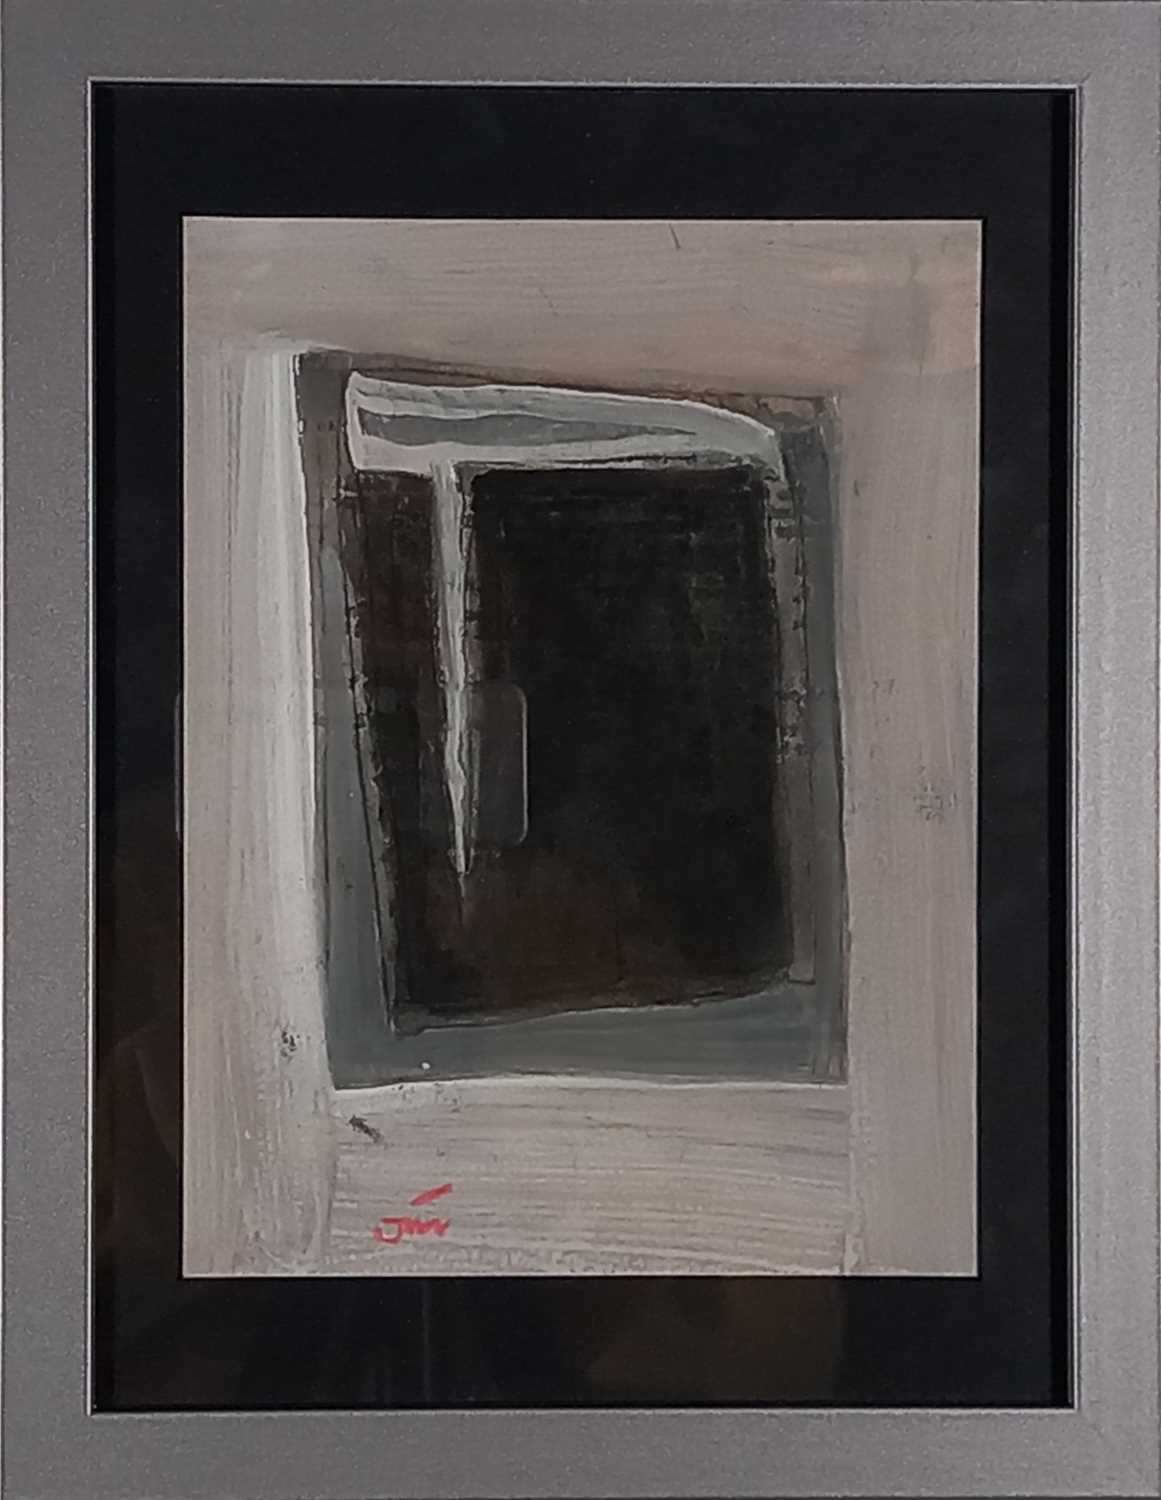 ƚ Tony O'MALLEY (Irish 1913-2003) Abstract in Black, White and Grey, Gouache, Signed with initials - Image 2 of 3